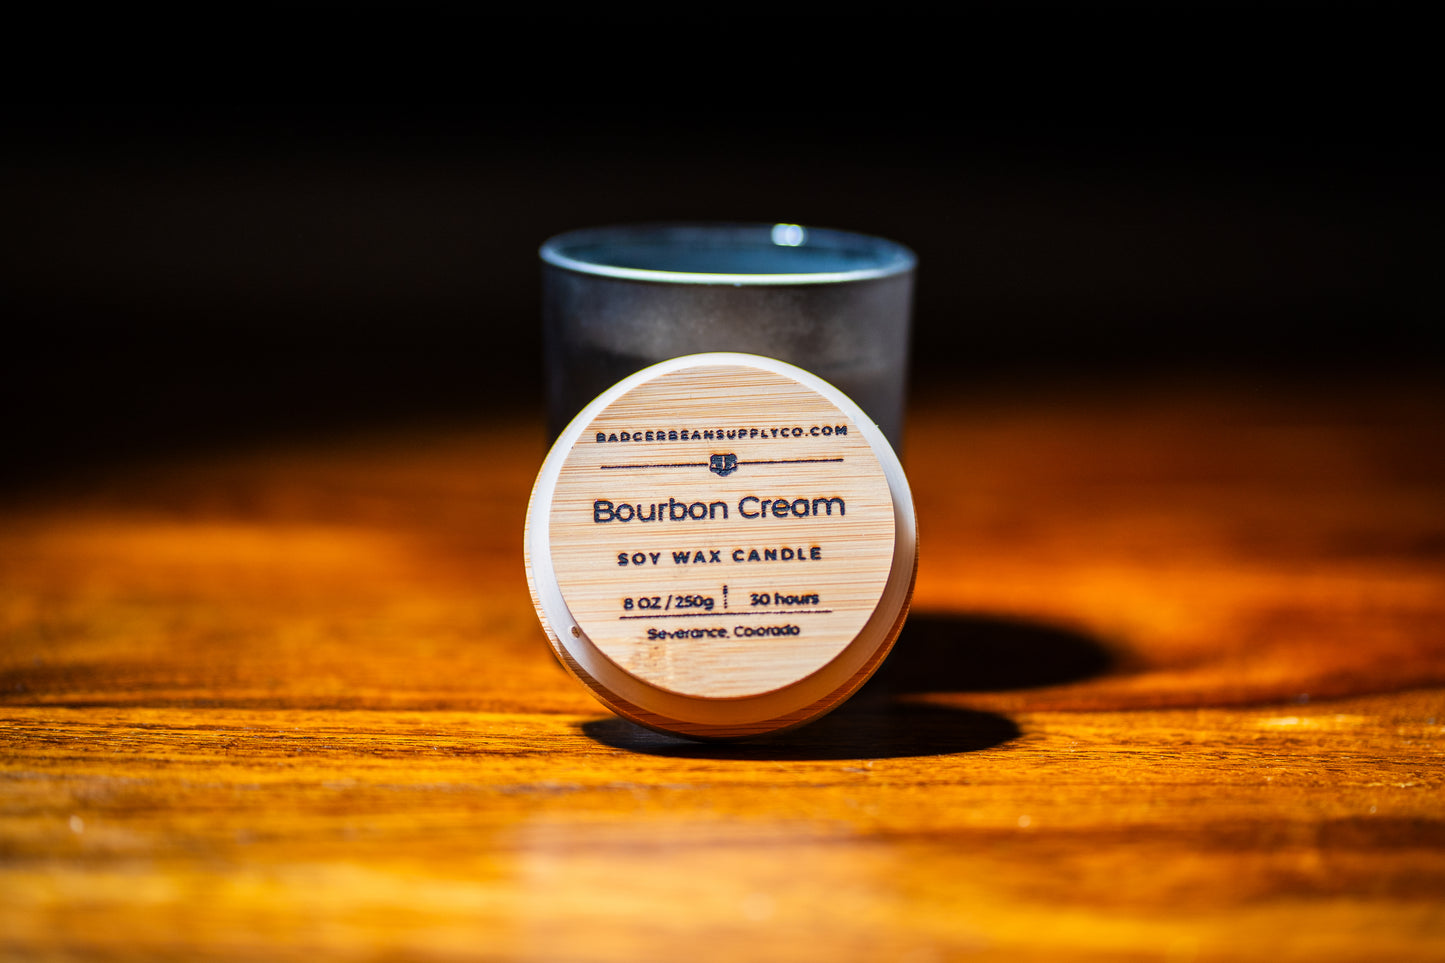 Bourbon Cream Soy Wax Candle